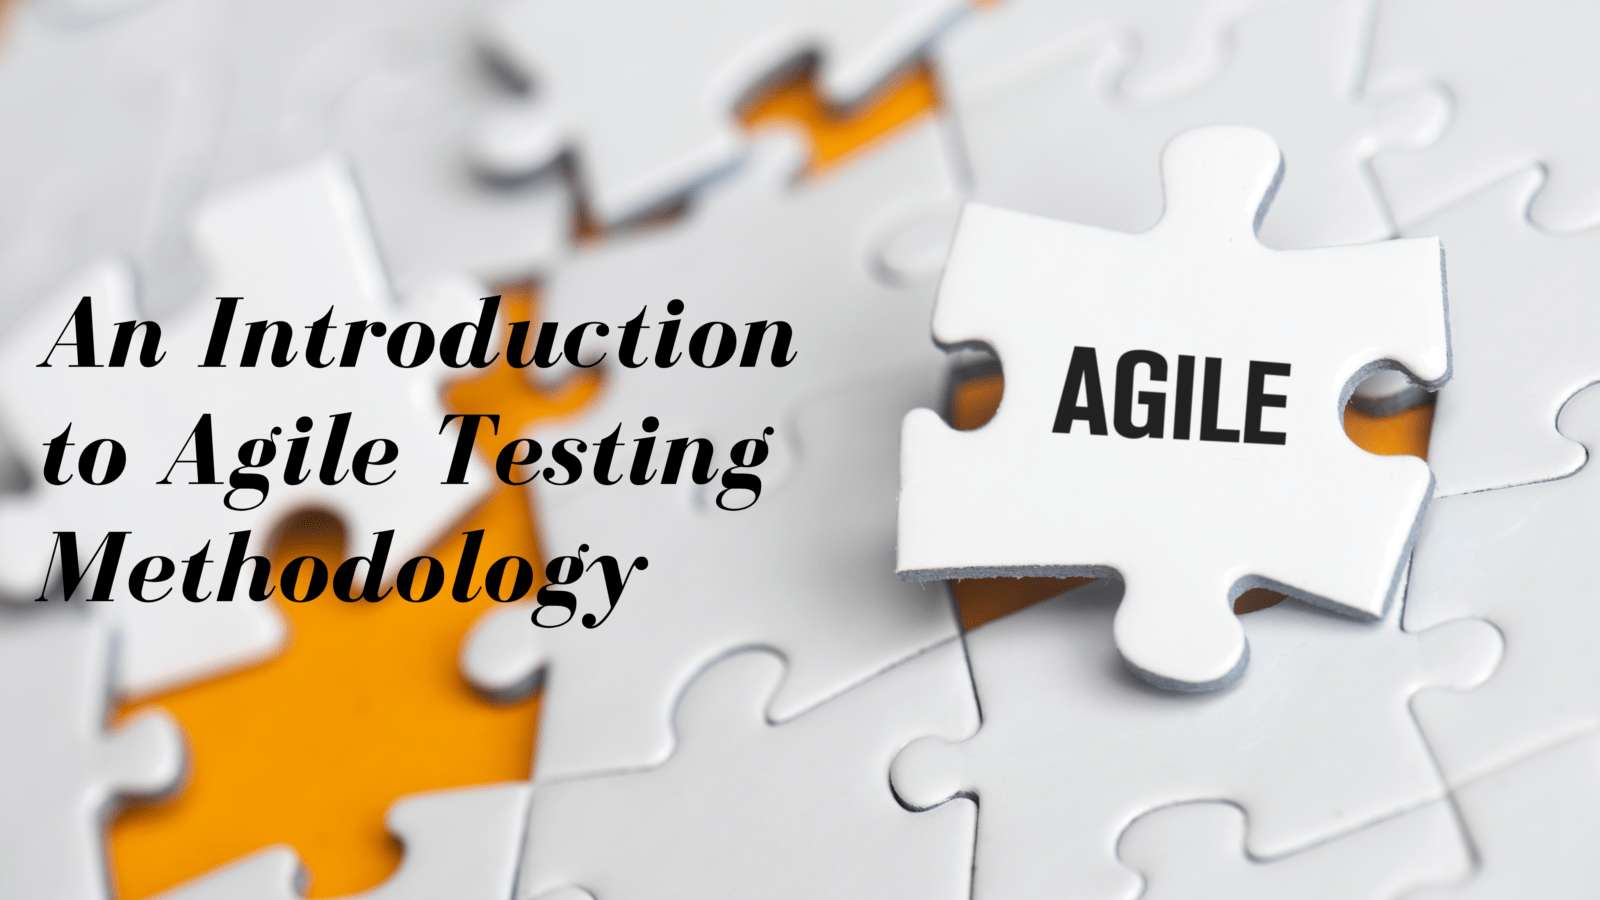 An Introduction to Agile Testing Methodology